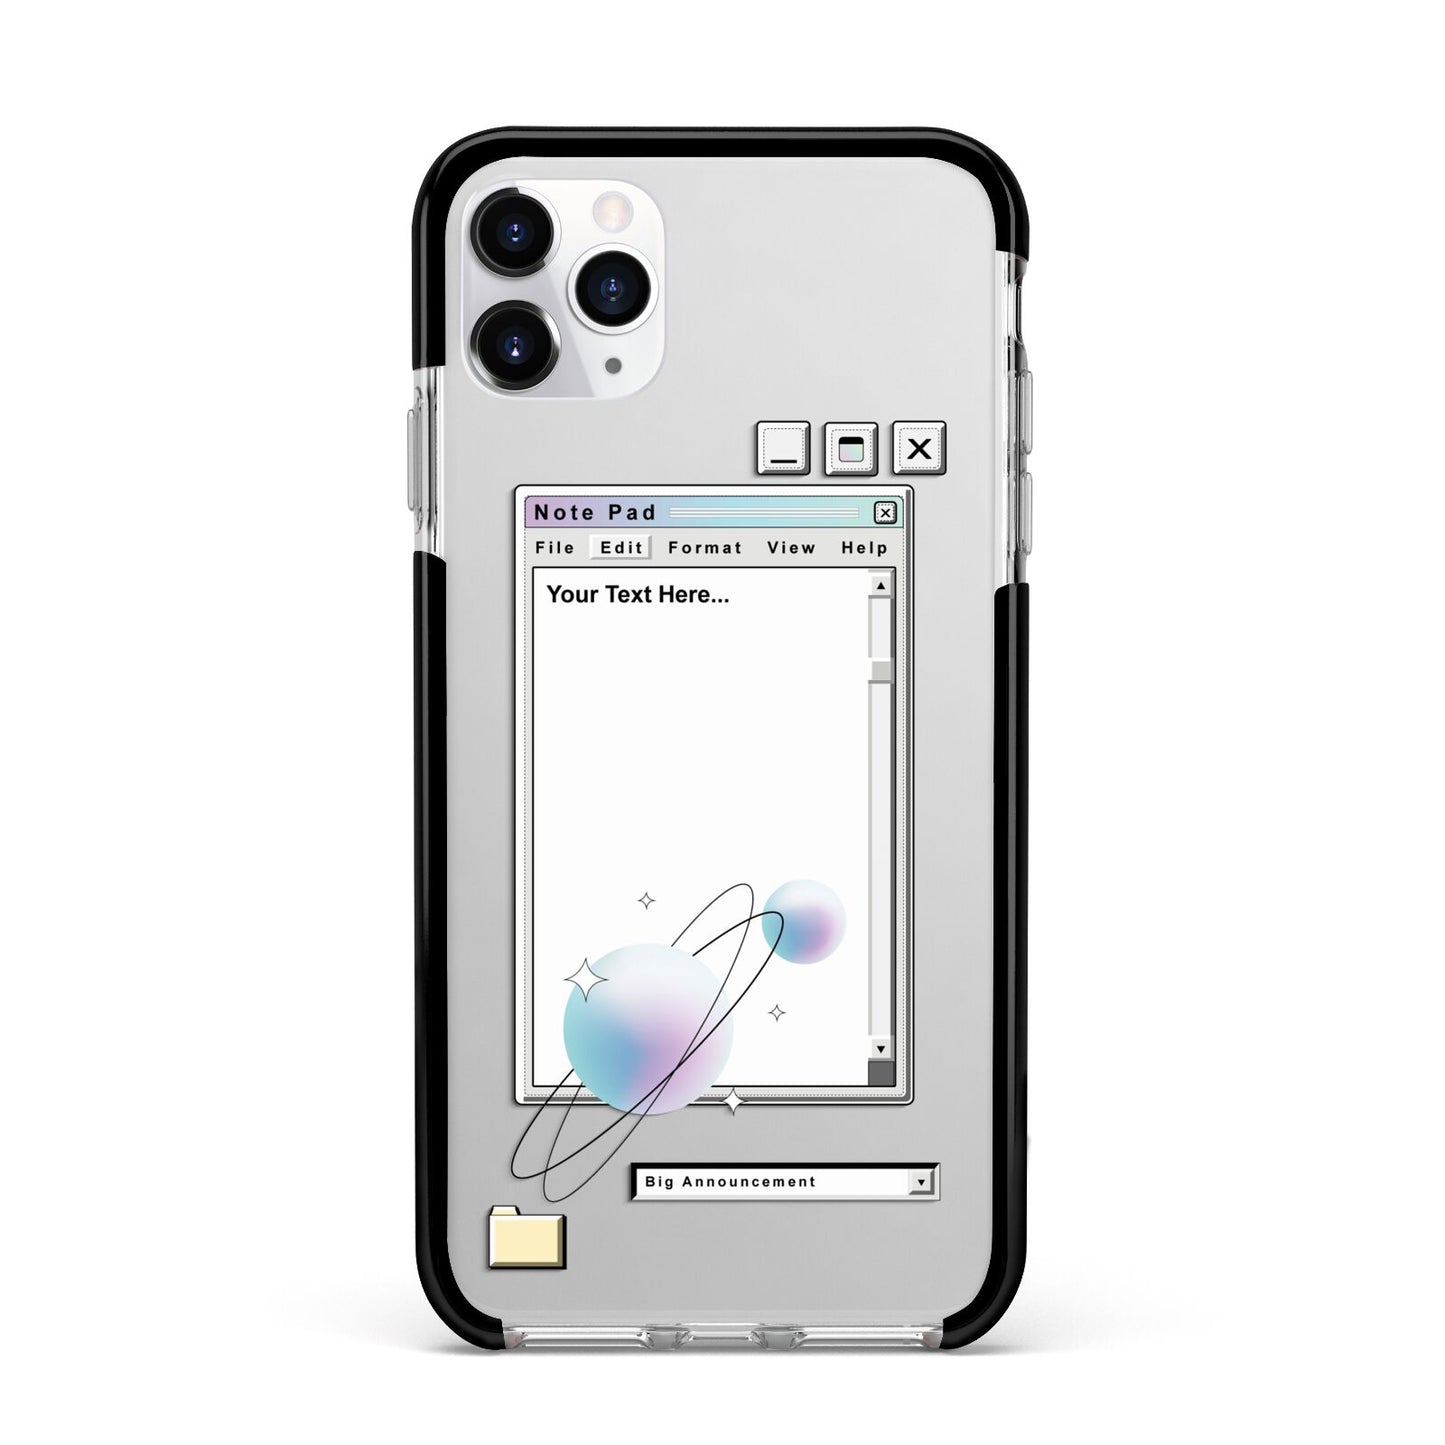 Retro Note Pad Apple iPhone 11 Pro Max in Silver with Black Impact Case